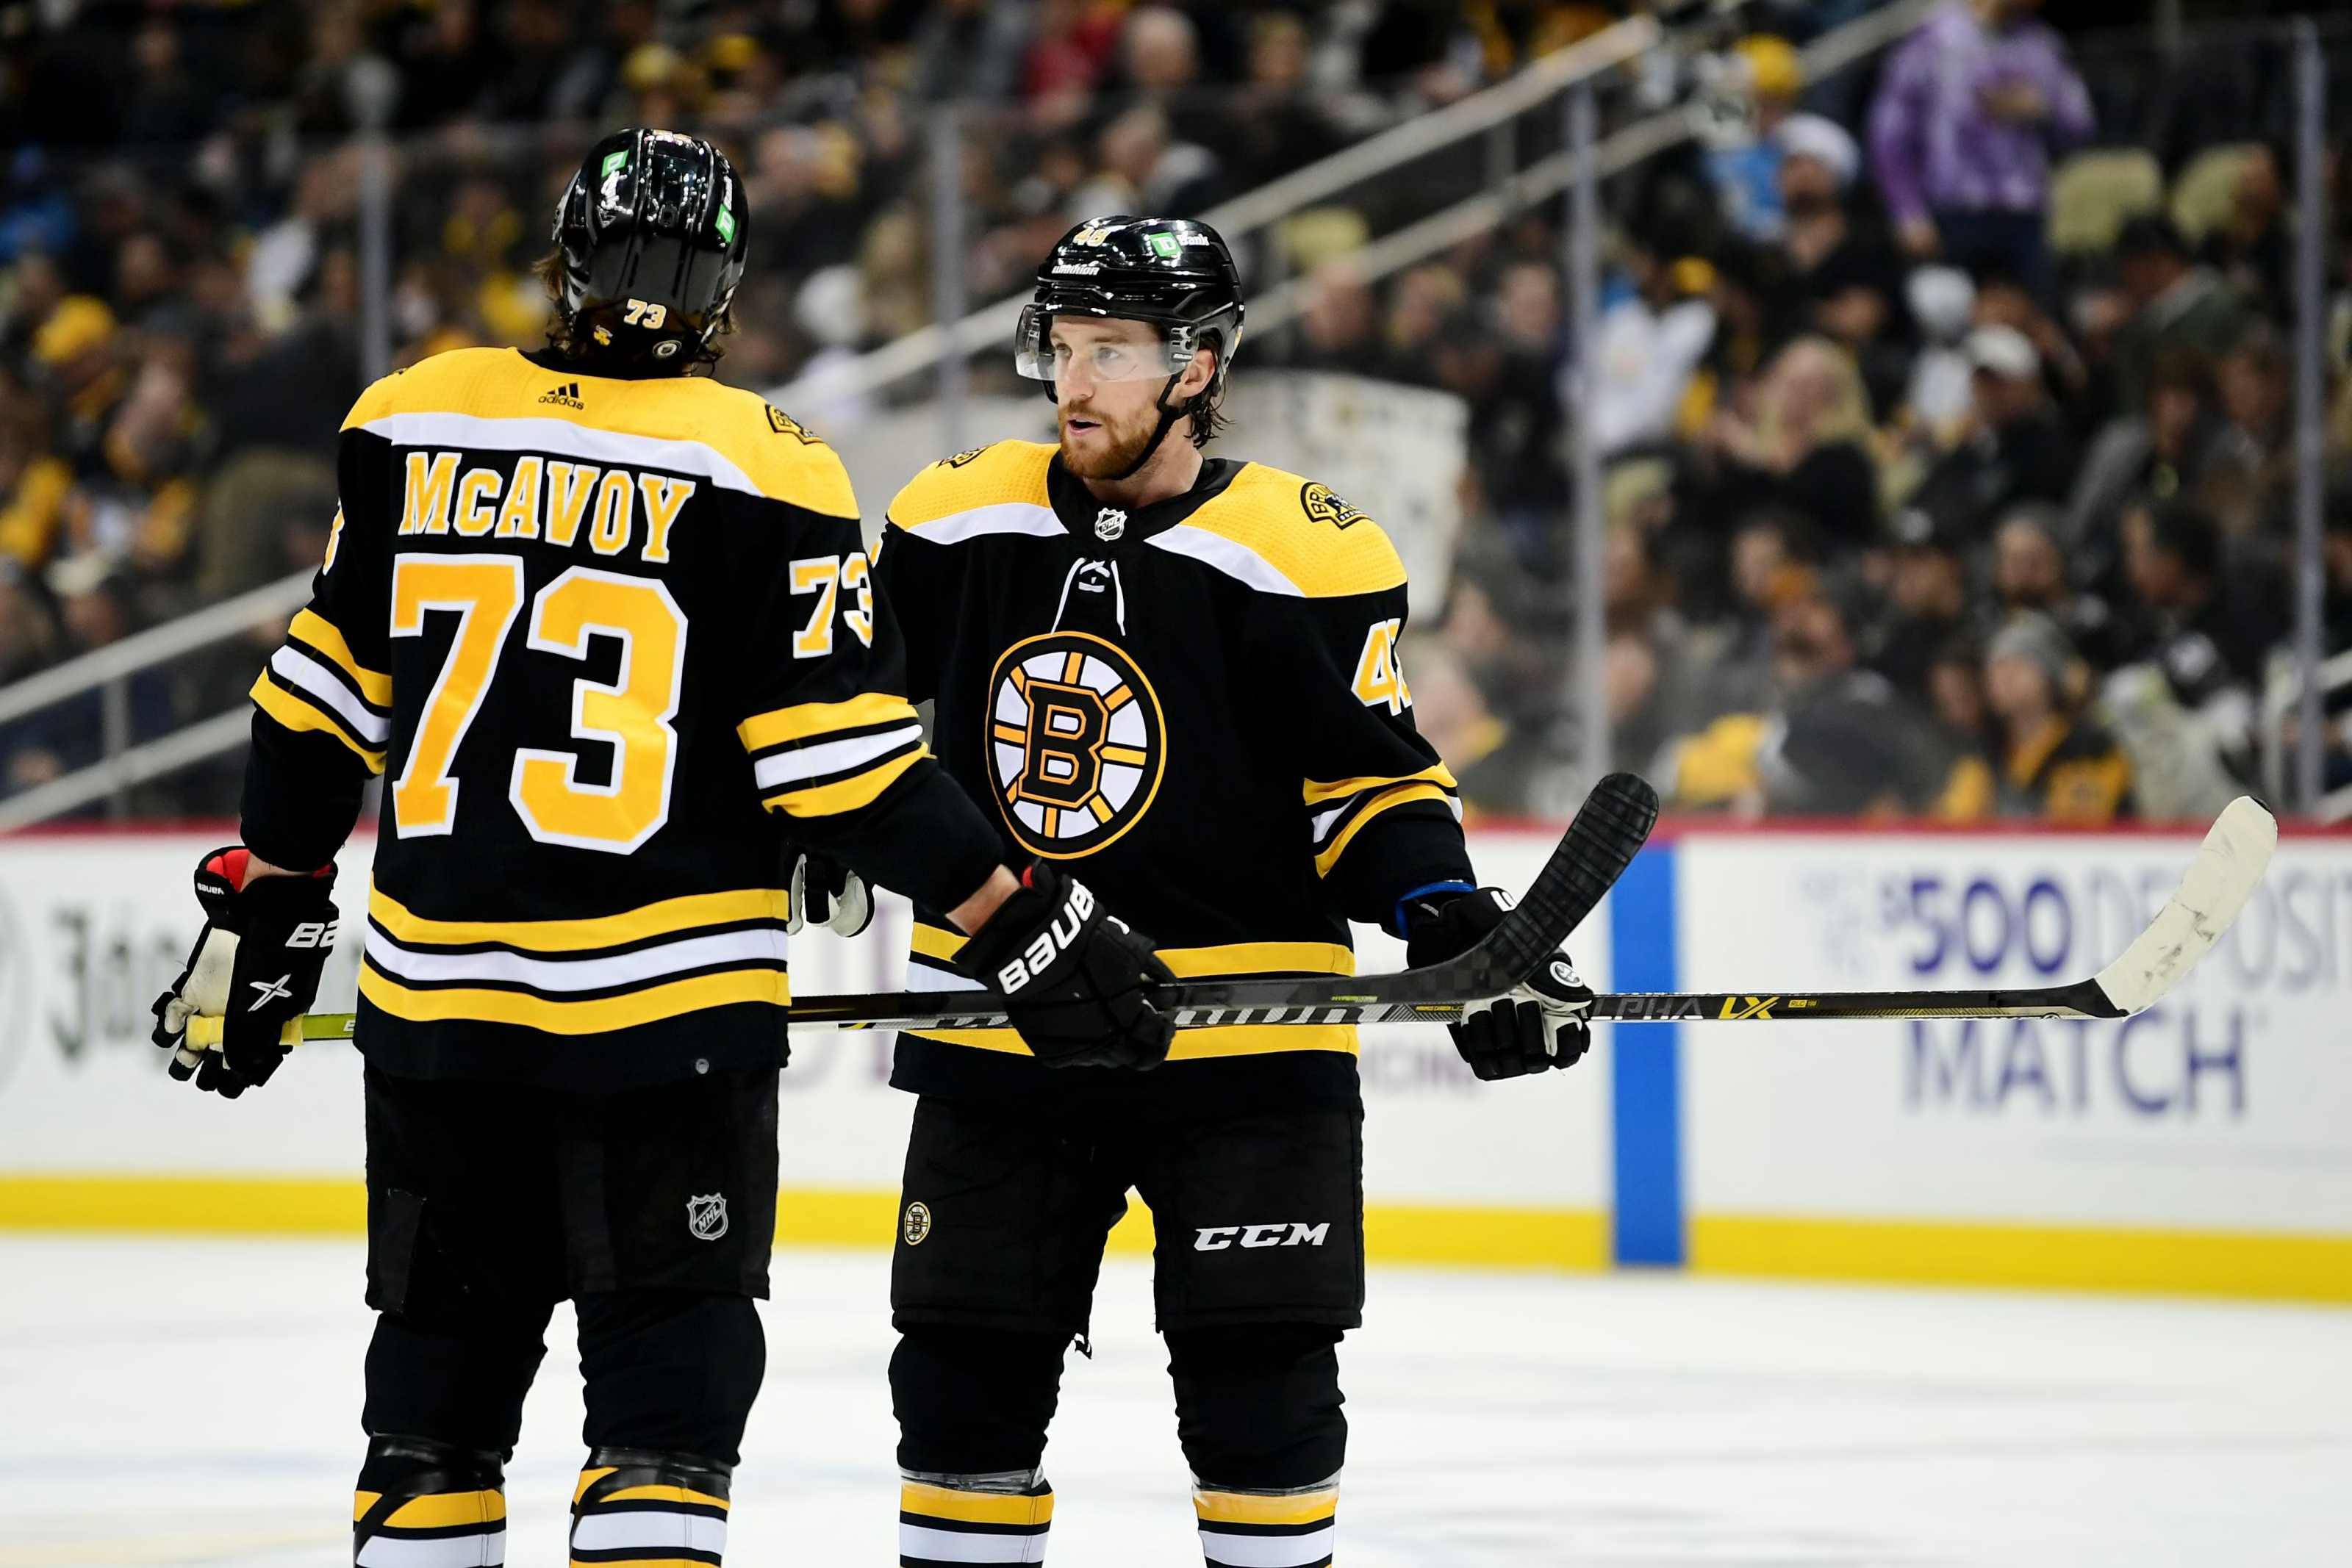 The Boston Bruins Guide and Preview for the 2022-23 NHL Season